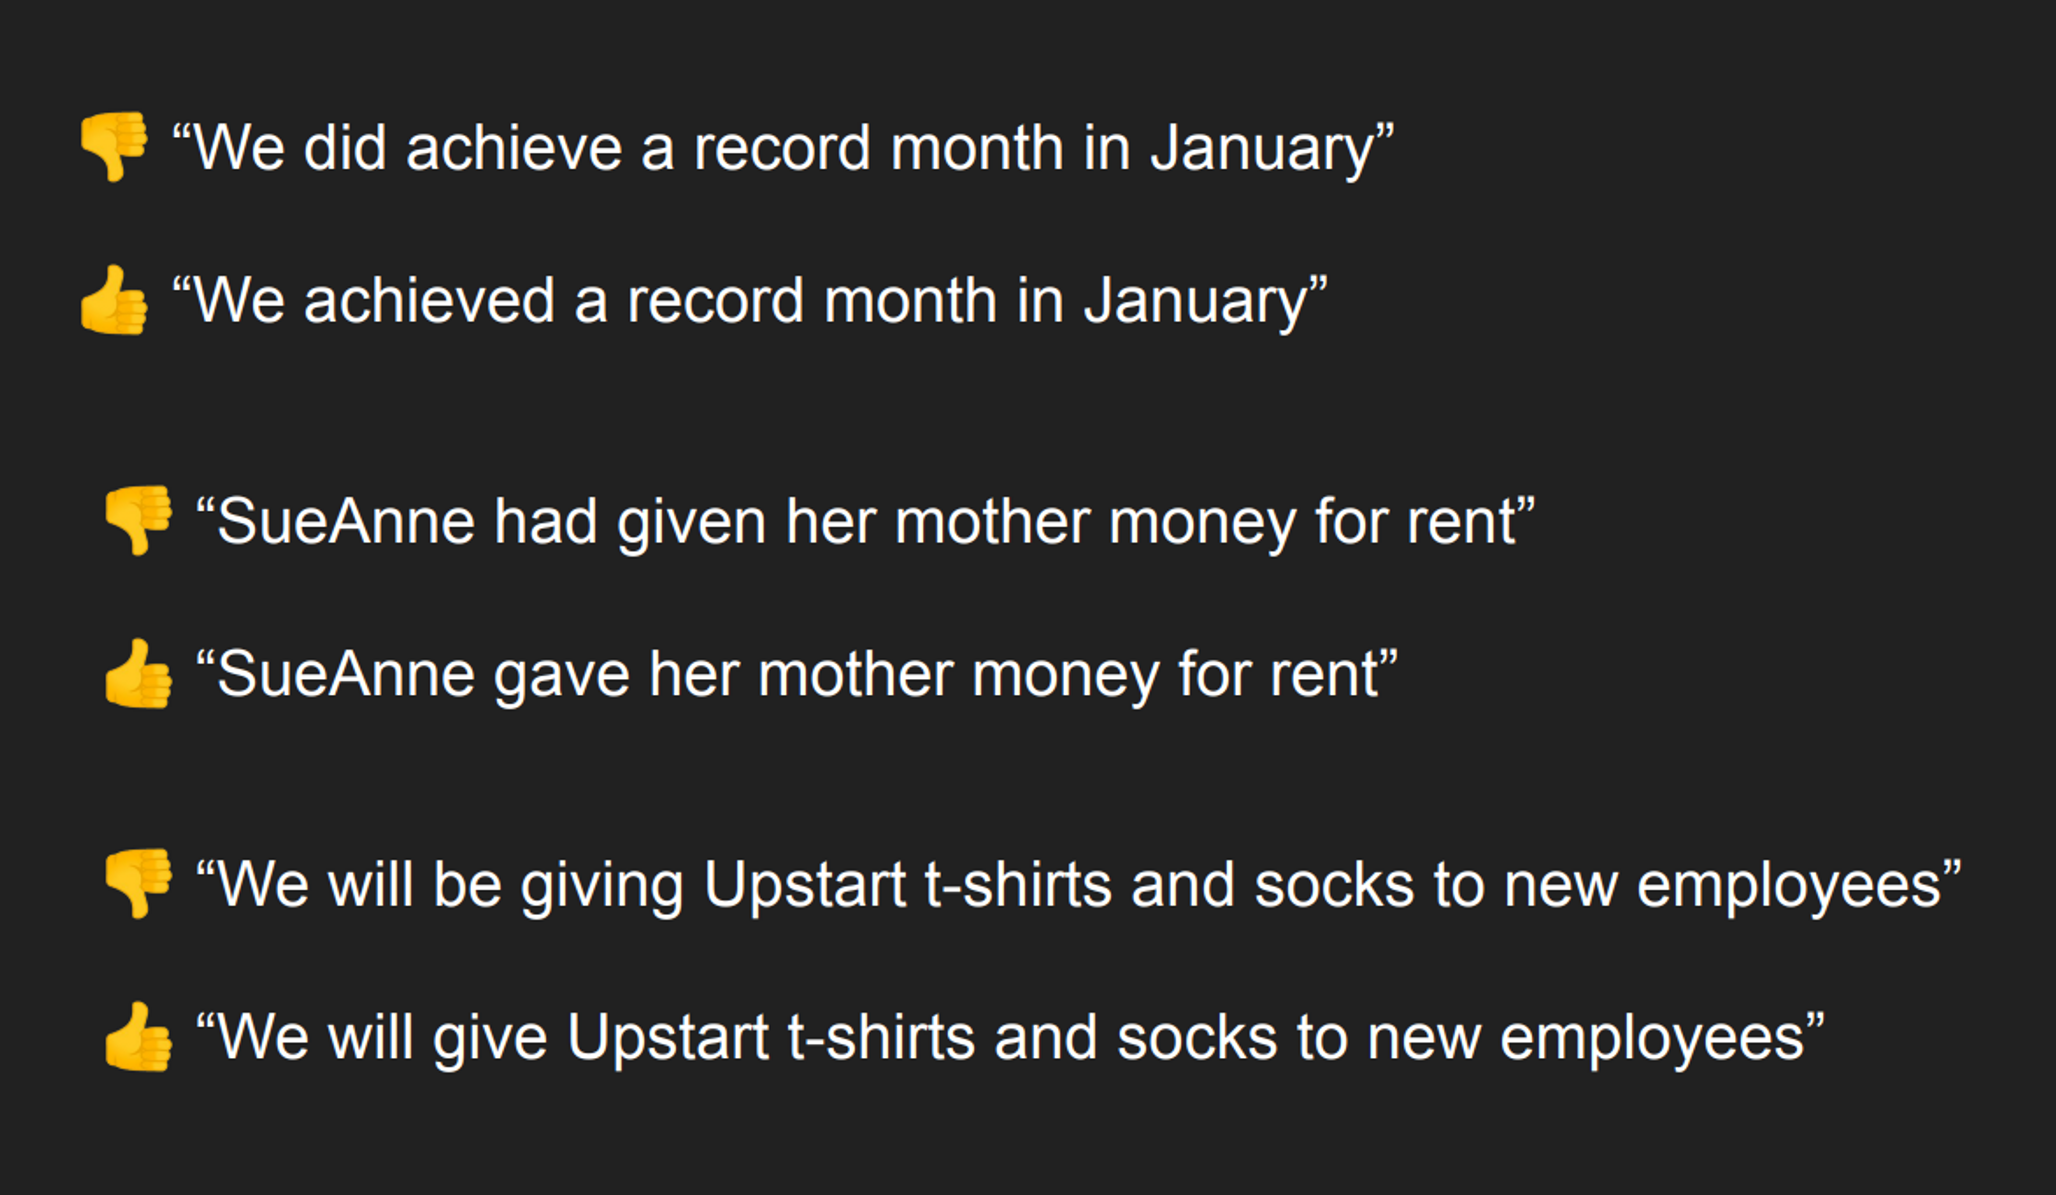 We did achieve a record month in January”
👍 “We achieved a record month in January”
👎 “SueAnne had given her mother money for rent”
👍 “SueAnne gave her mother money for rent”
👎 “We will be giving Upstart t-shirts and socks to new employees” 👍 “We will give Upstart t-shirts and socks to new employees”